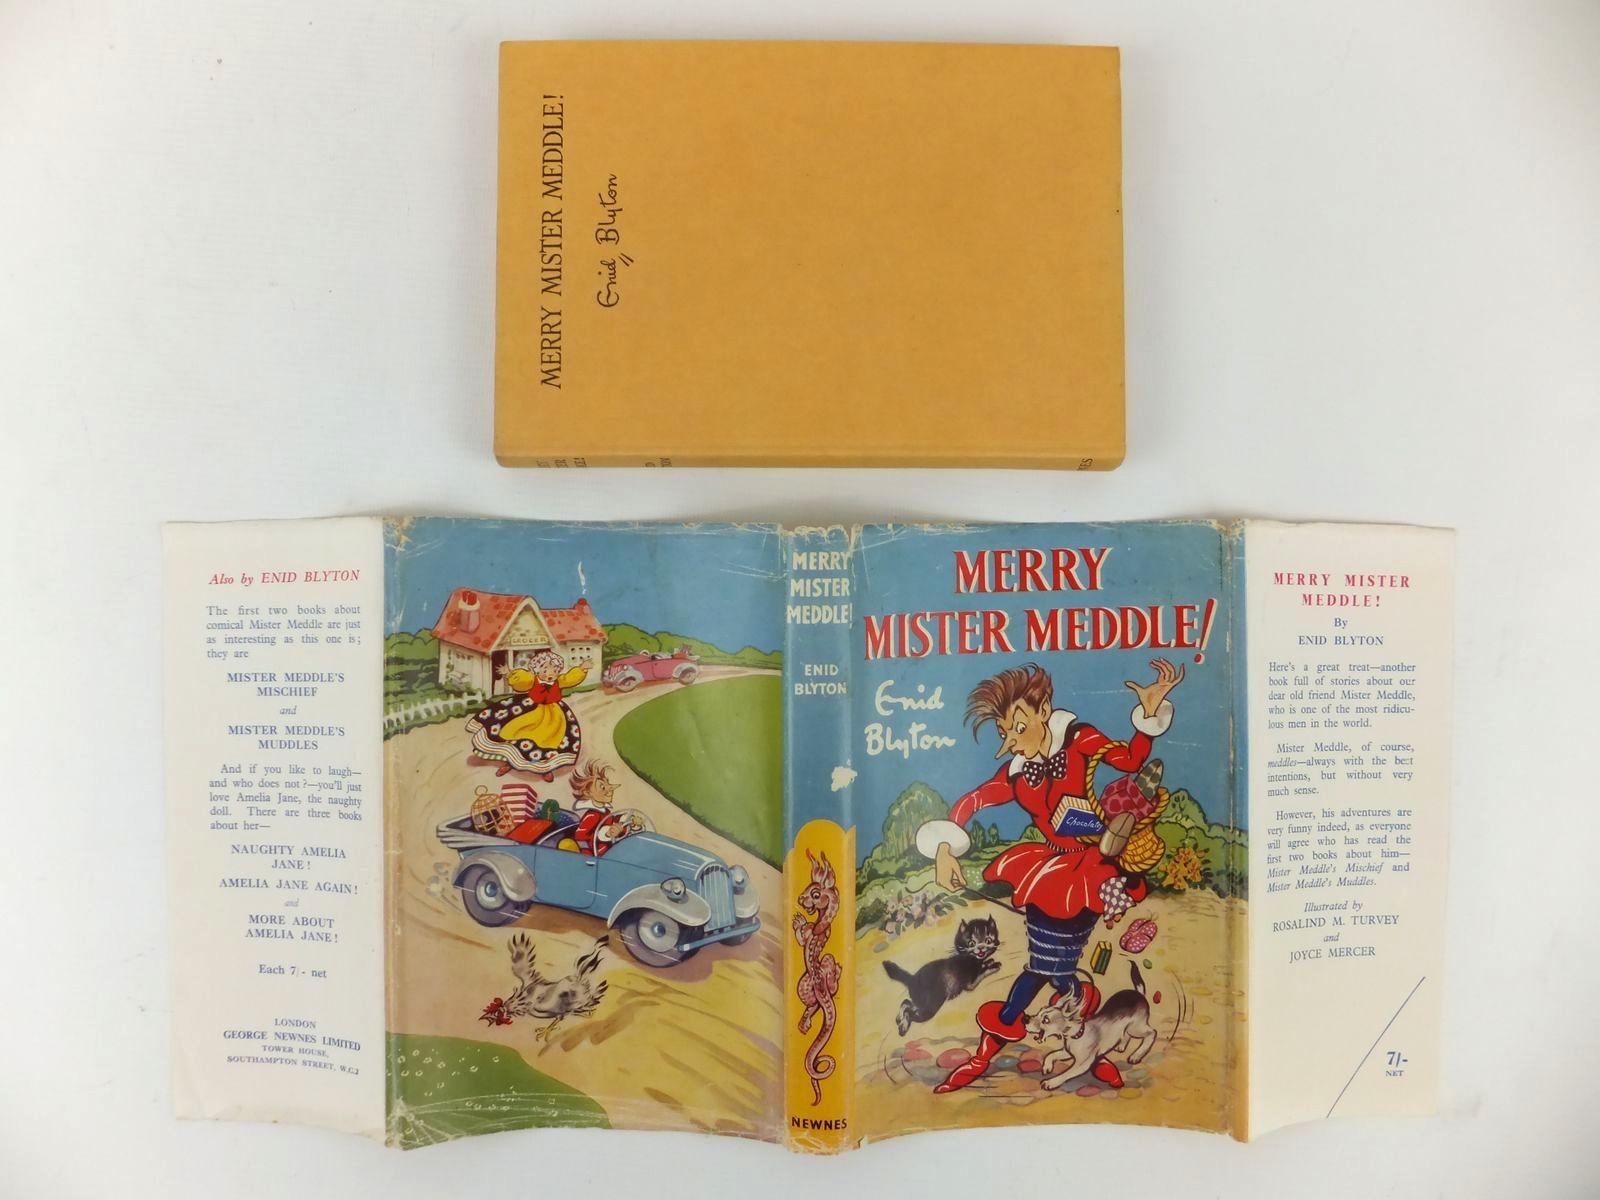 Photo of MERRY MISTER MEDDLE! written by Blyton, Enid illustrated by Turvey, Rosalind M.
Mercer, Joyce published by George Newnes Limited (STOCK CODE: 2122043)  for sale by Stella & Rose's Books